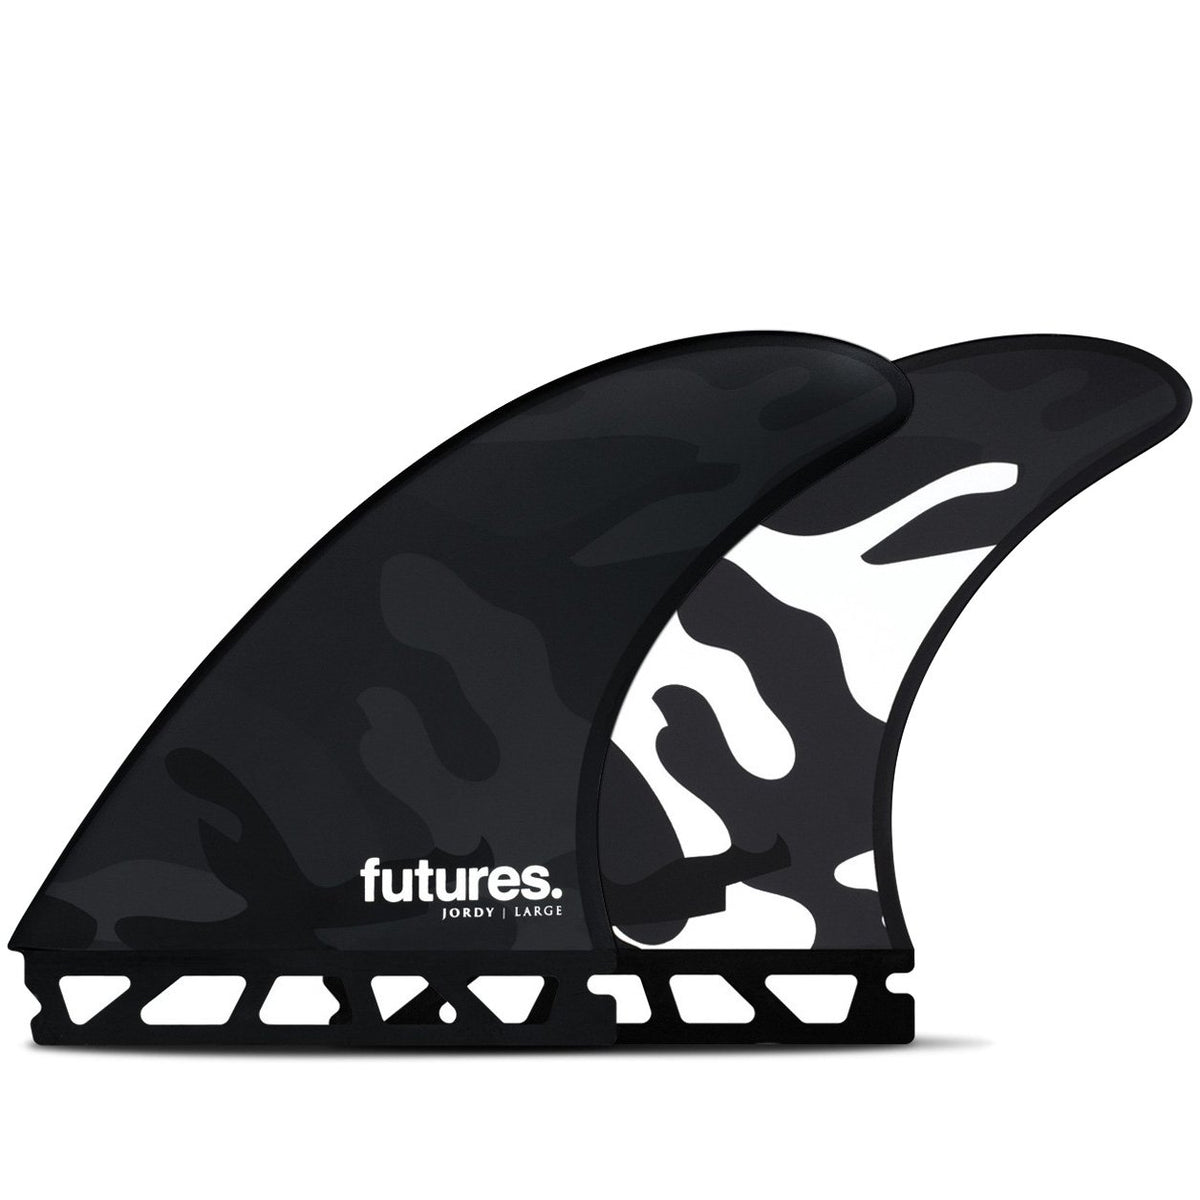 Futures Jordy Smith Honeycomb Thruster Surfboard Fins - Black/White Camo